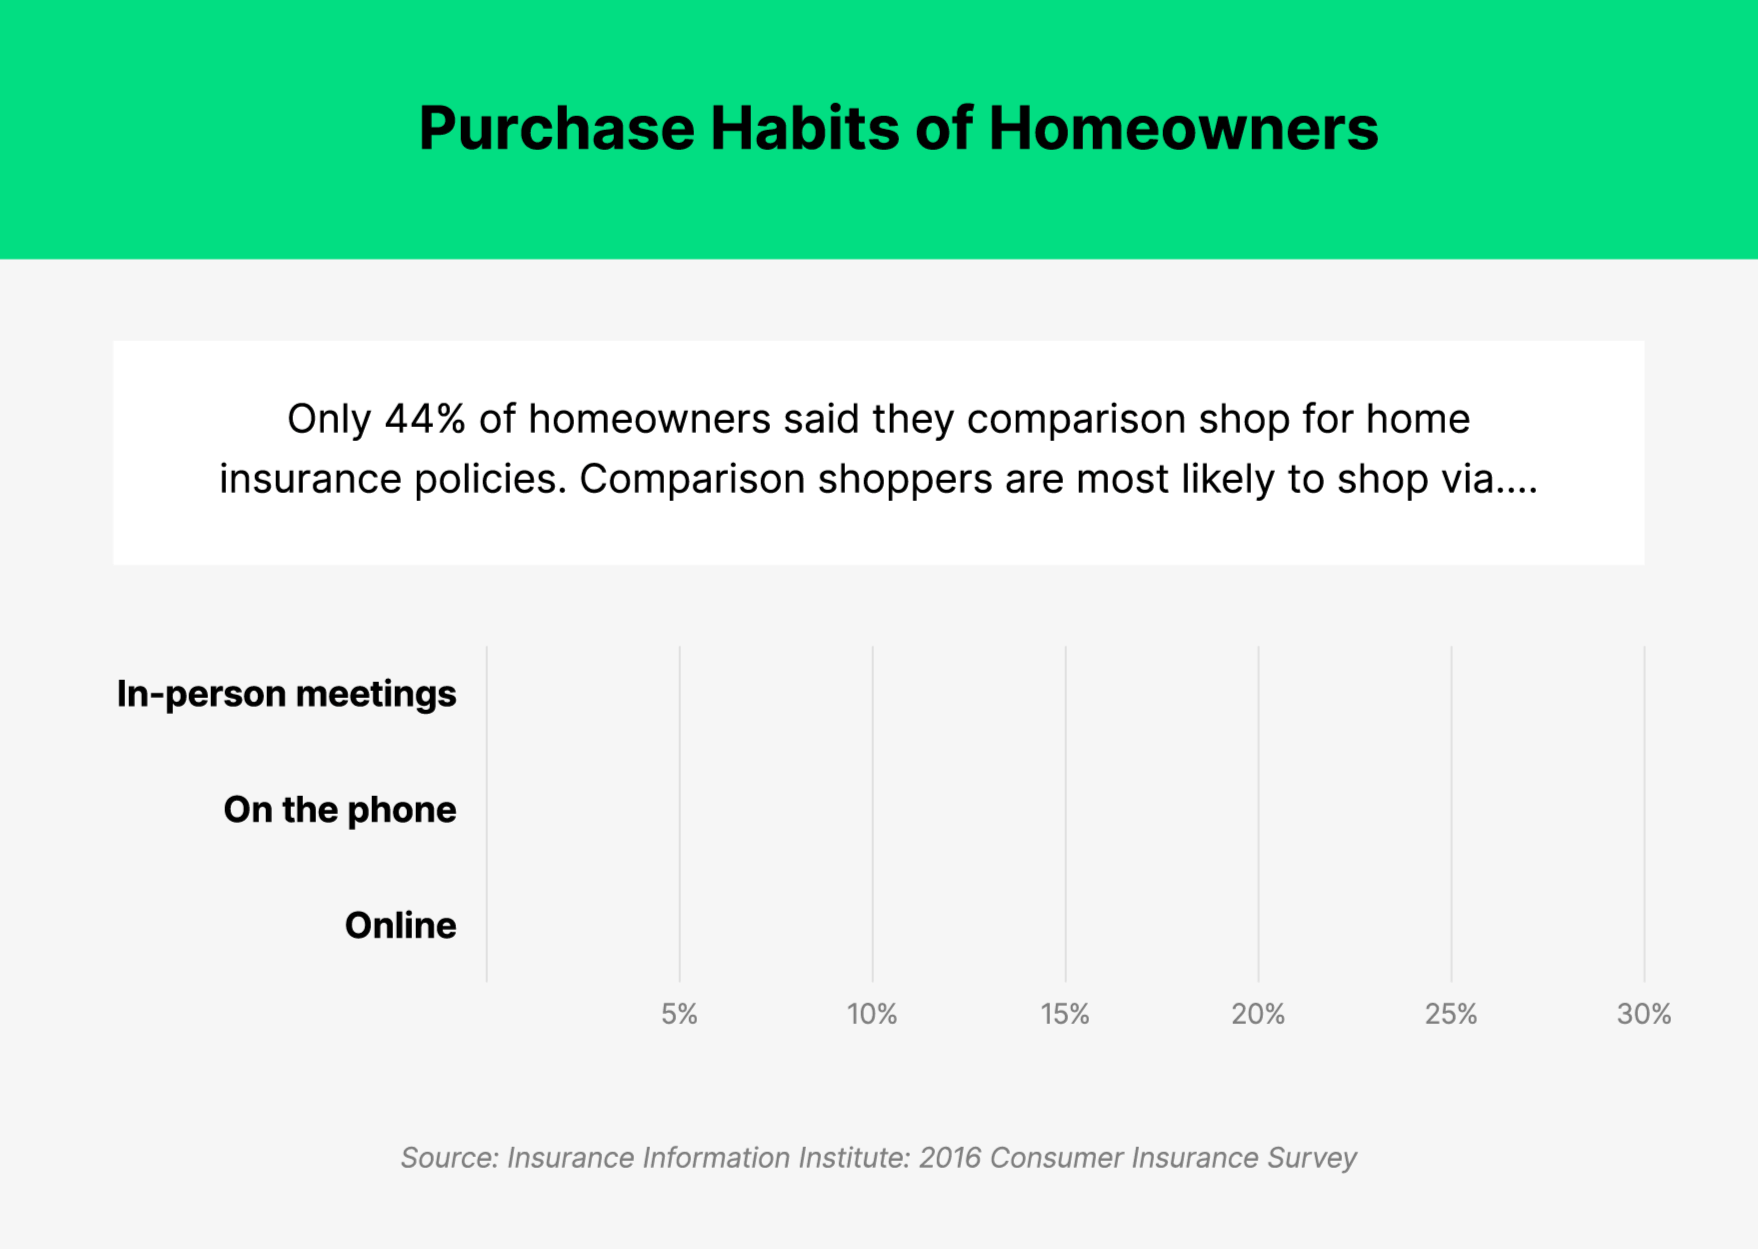 Only 44% of homeowners comparison shop for homeowners insurance